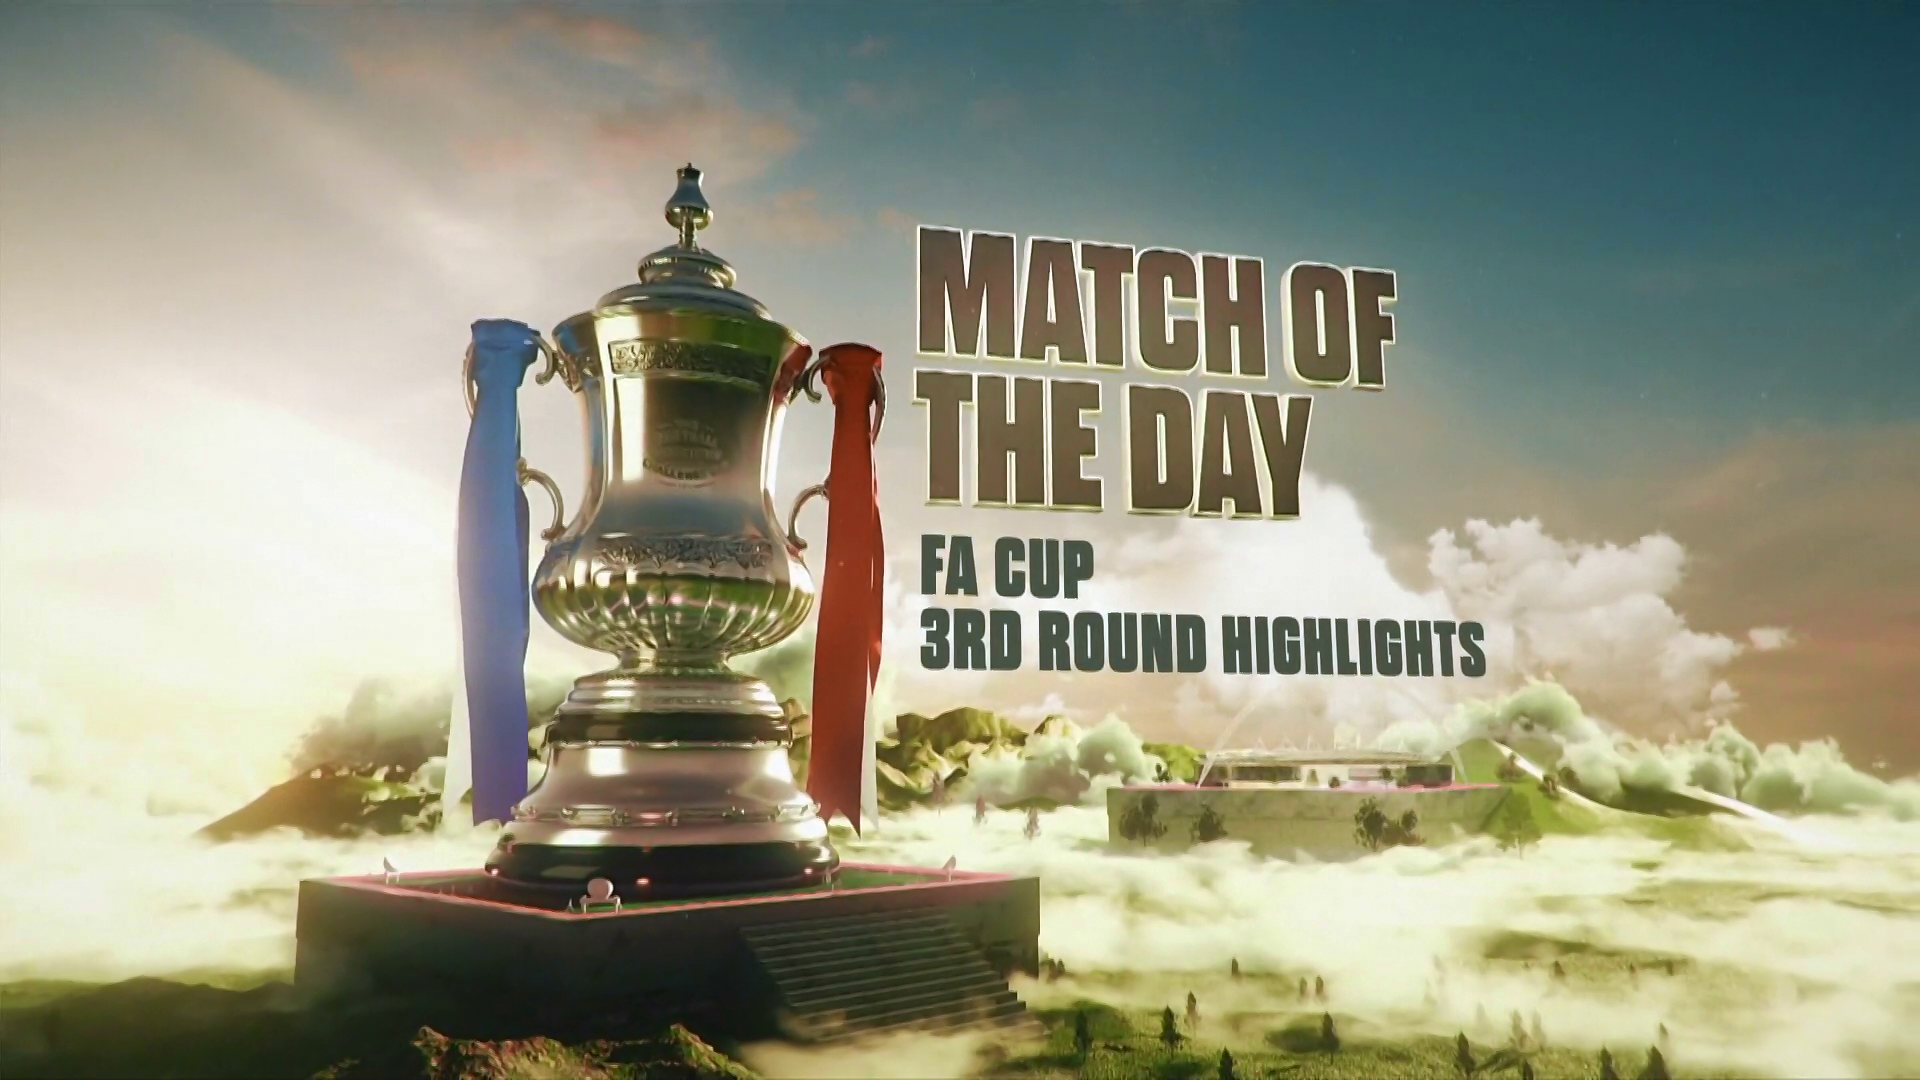 Match of the Day 2021 01 09 FA Cup Highlights 1080p